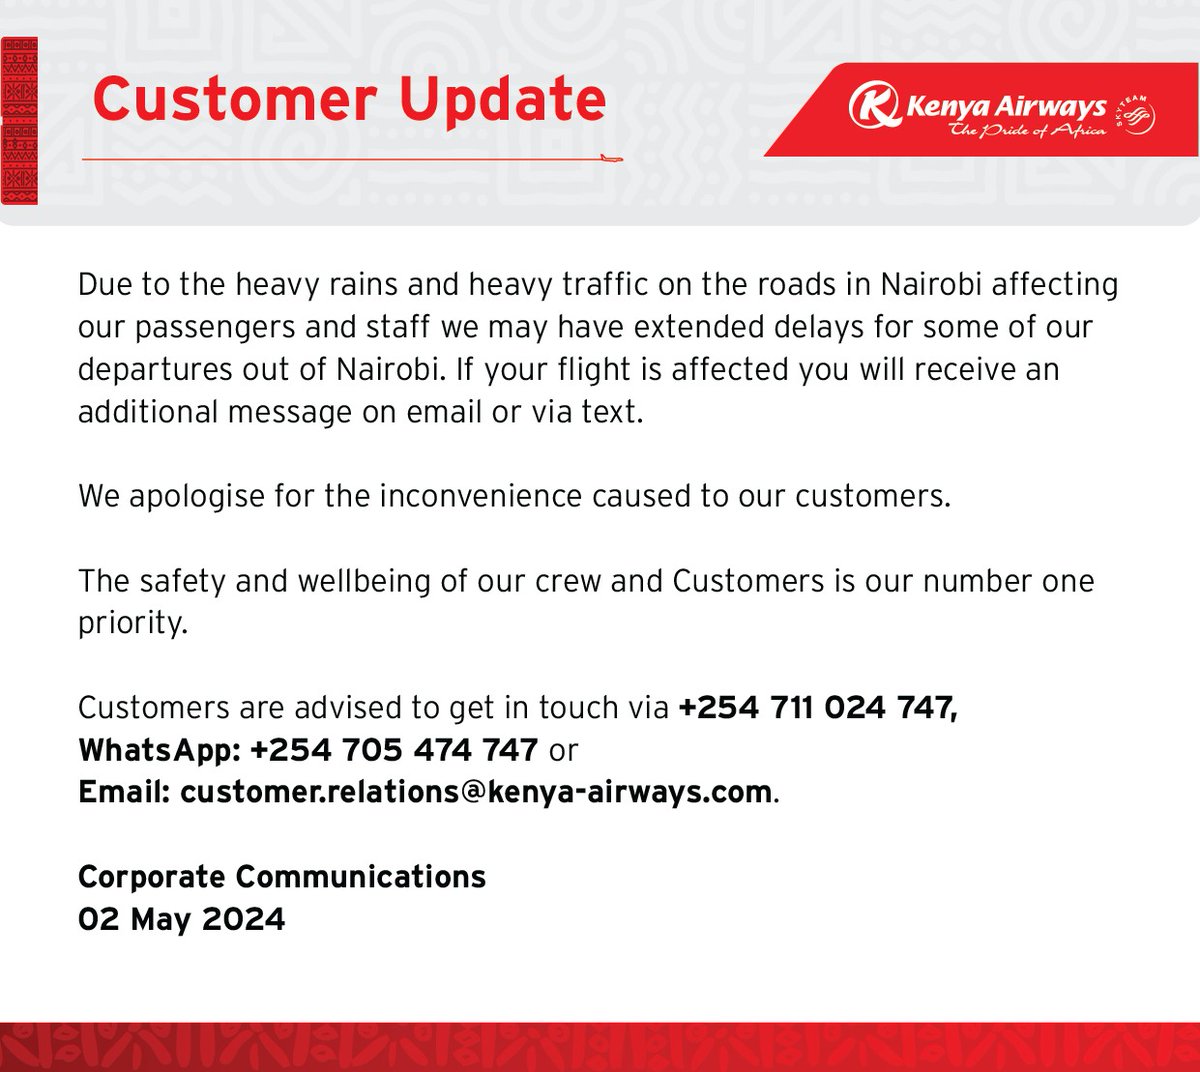 CUSTOMER UPDATE Due to the heavy rains and heavy traffic on the roads in Nairobi affecting our passengers and staff, we may have extended delays for some of our departures out of Nairobi. If your flight is affected, you will receive an additional message on email or via text.